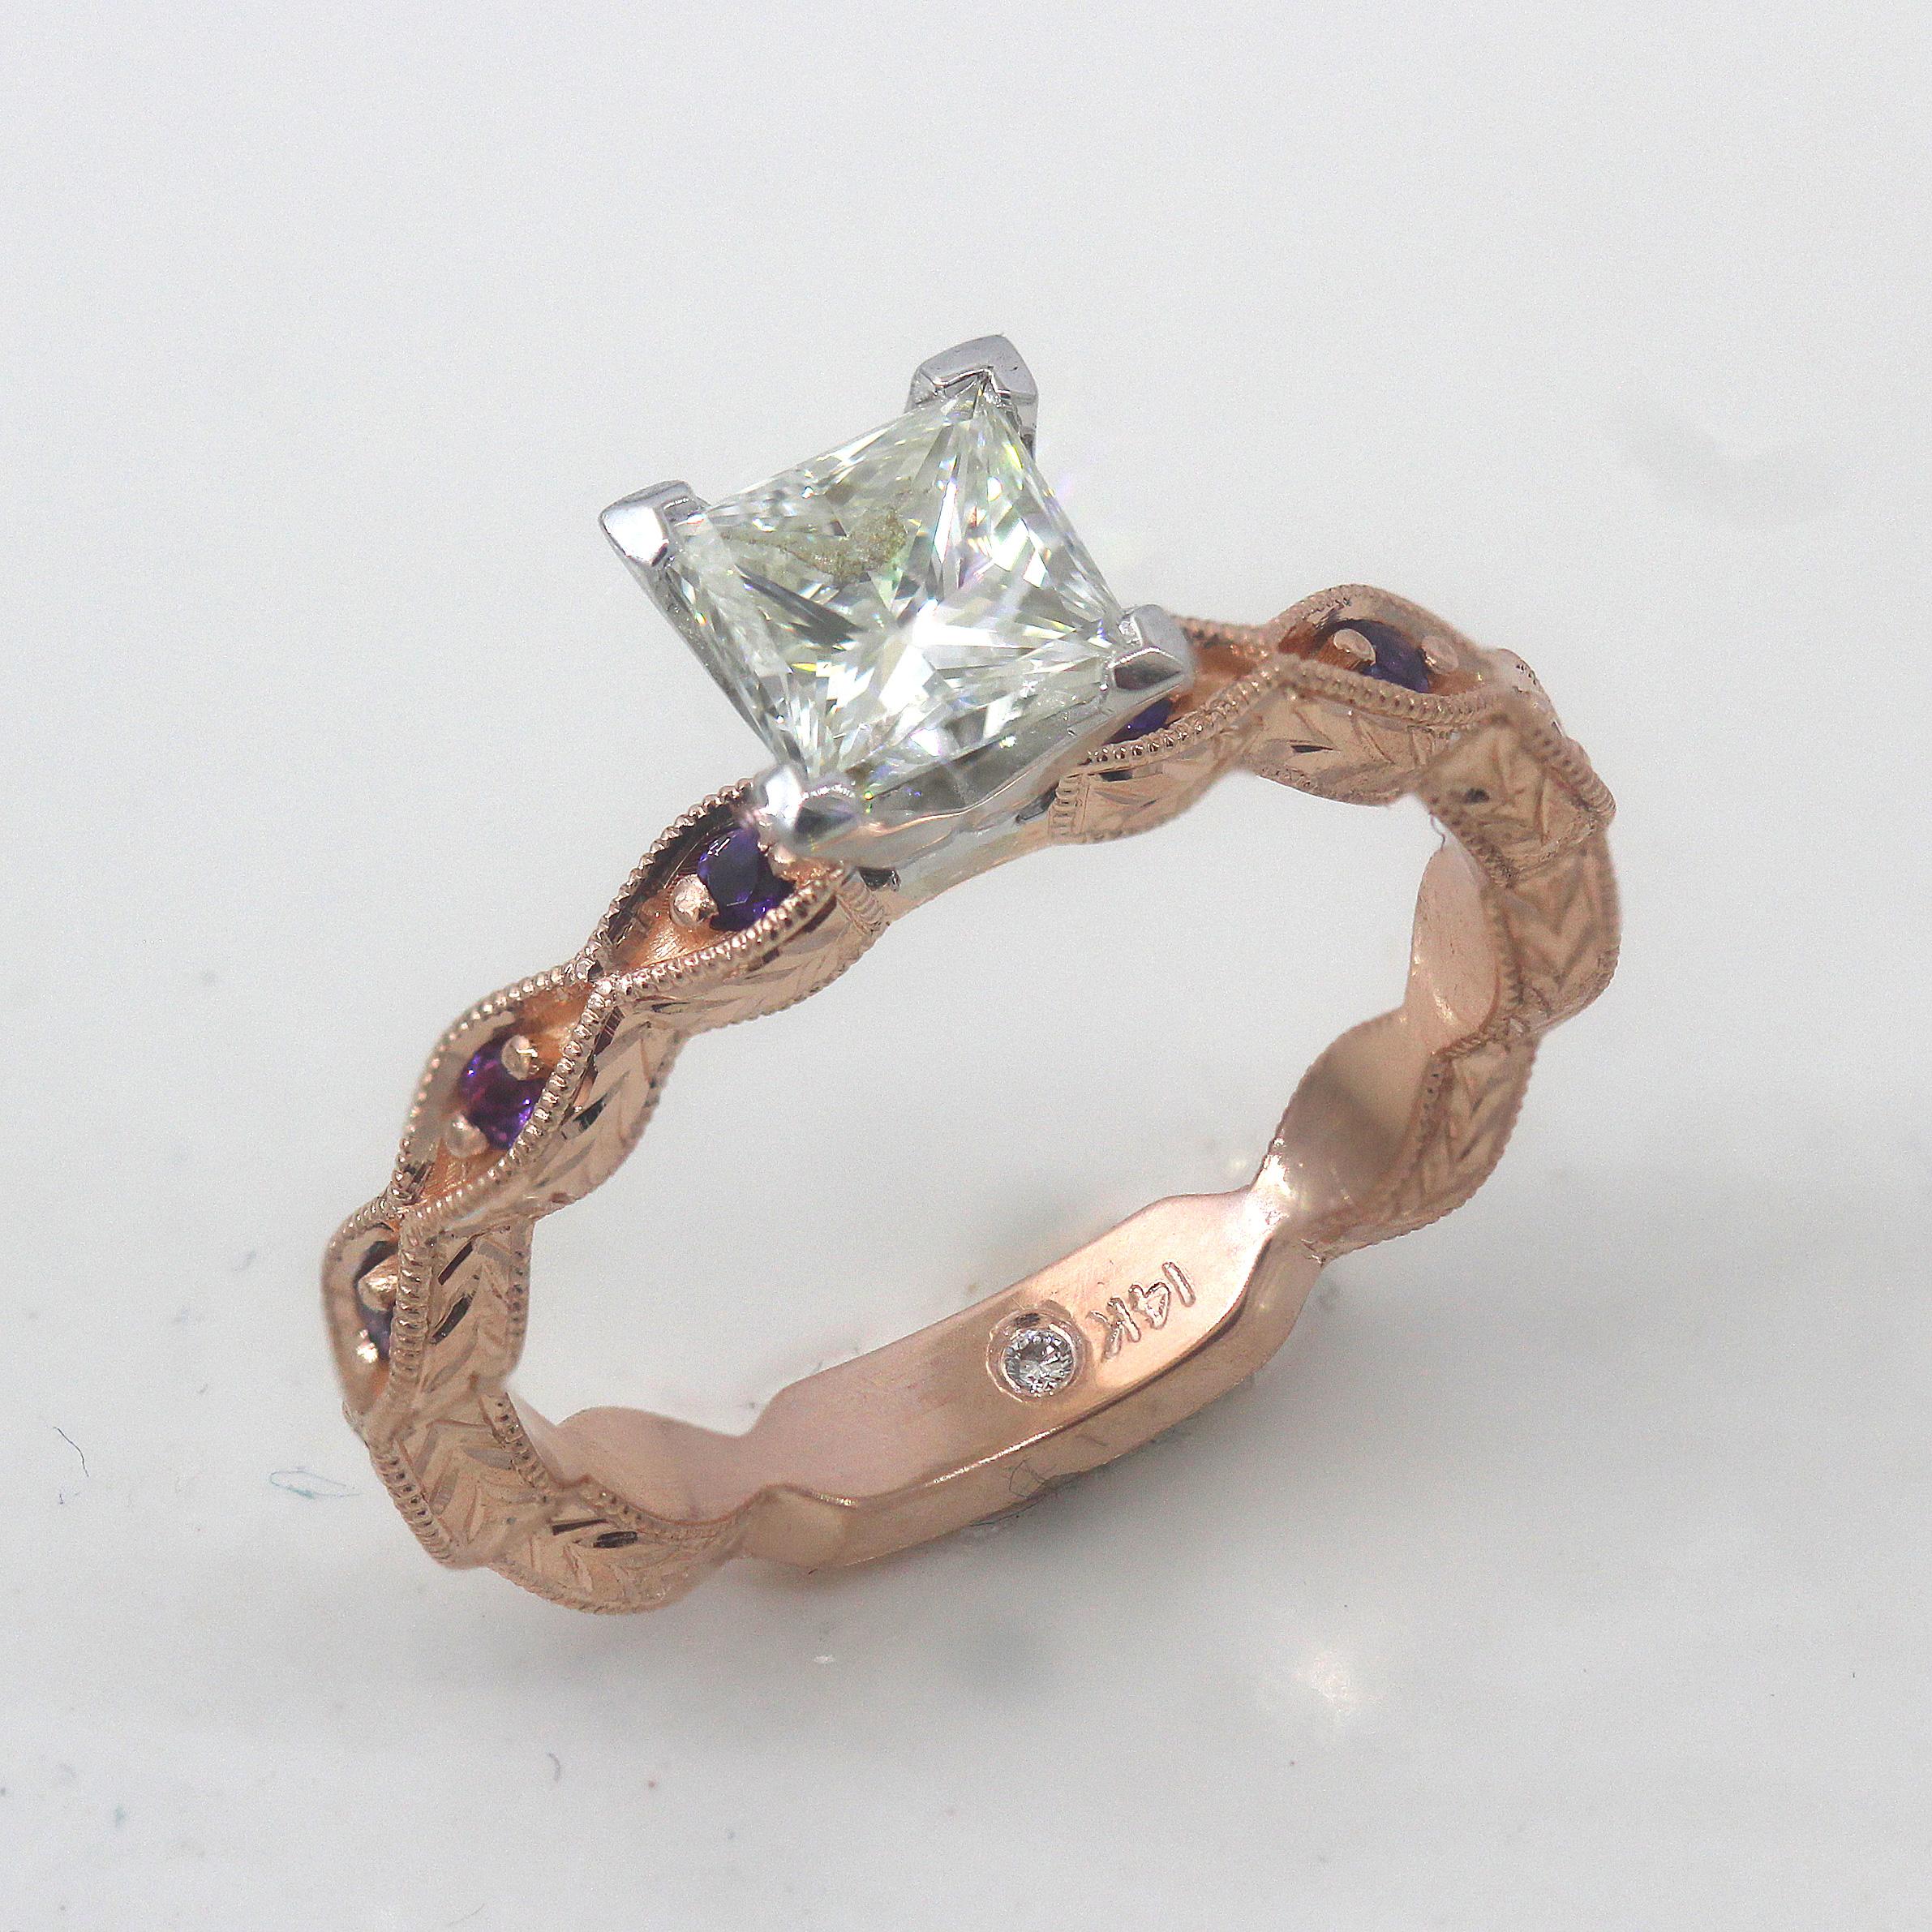 BU230

Ring will be made to order and can be purchased without the center stone. I can supply a different center stone to fit your budget if it is higher or lower. If already sold ring will be made to order and take approximately 3-6 business